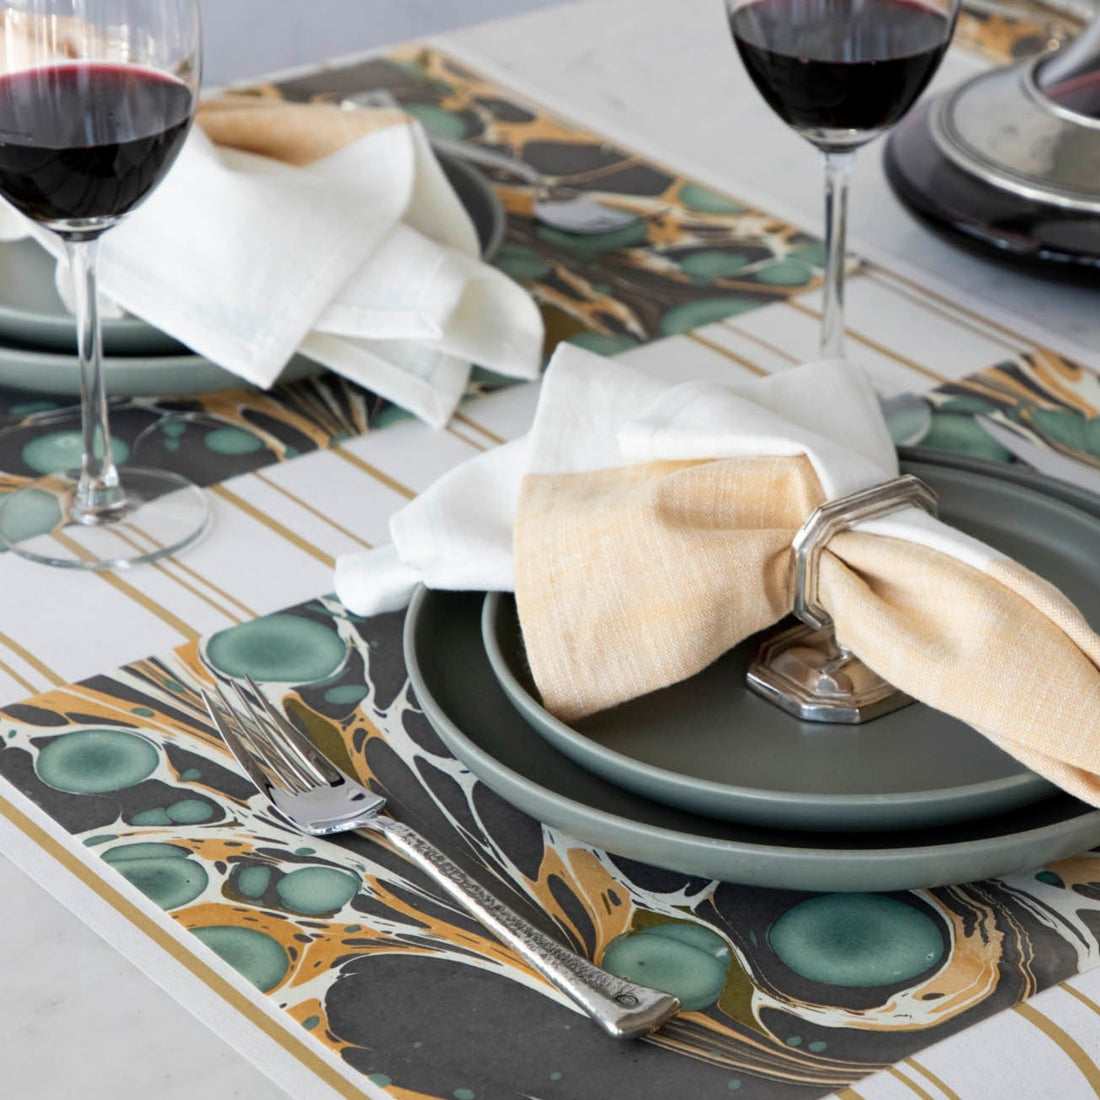 The Brown Stone Marbled Placemat under an elegant table setting.